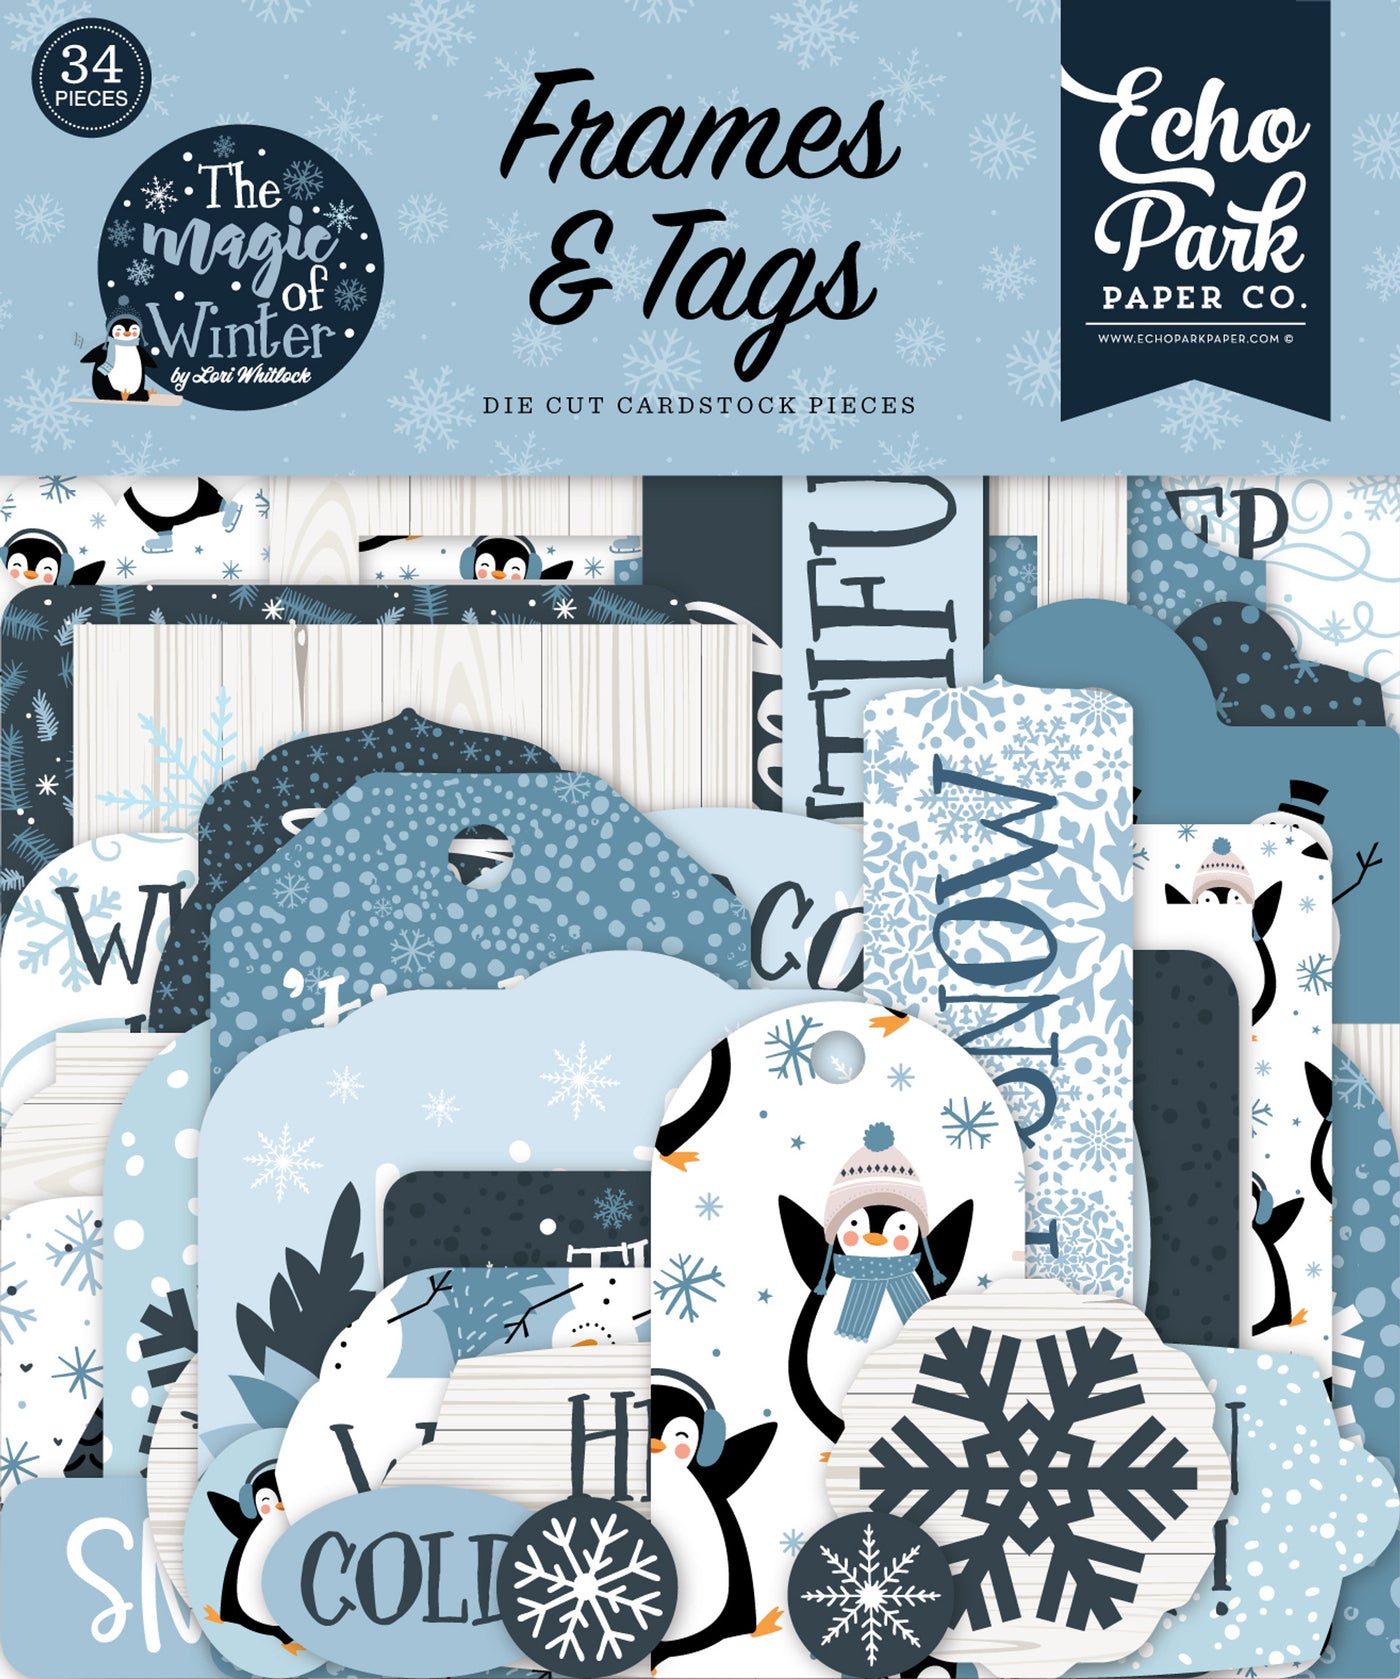 The Magic of Winter Frames & Tags Die Cut Cardstock Pack includes 34 die-cut shapes ready to embellish any project.